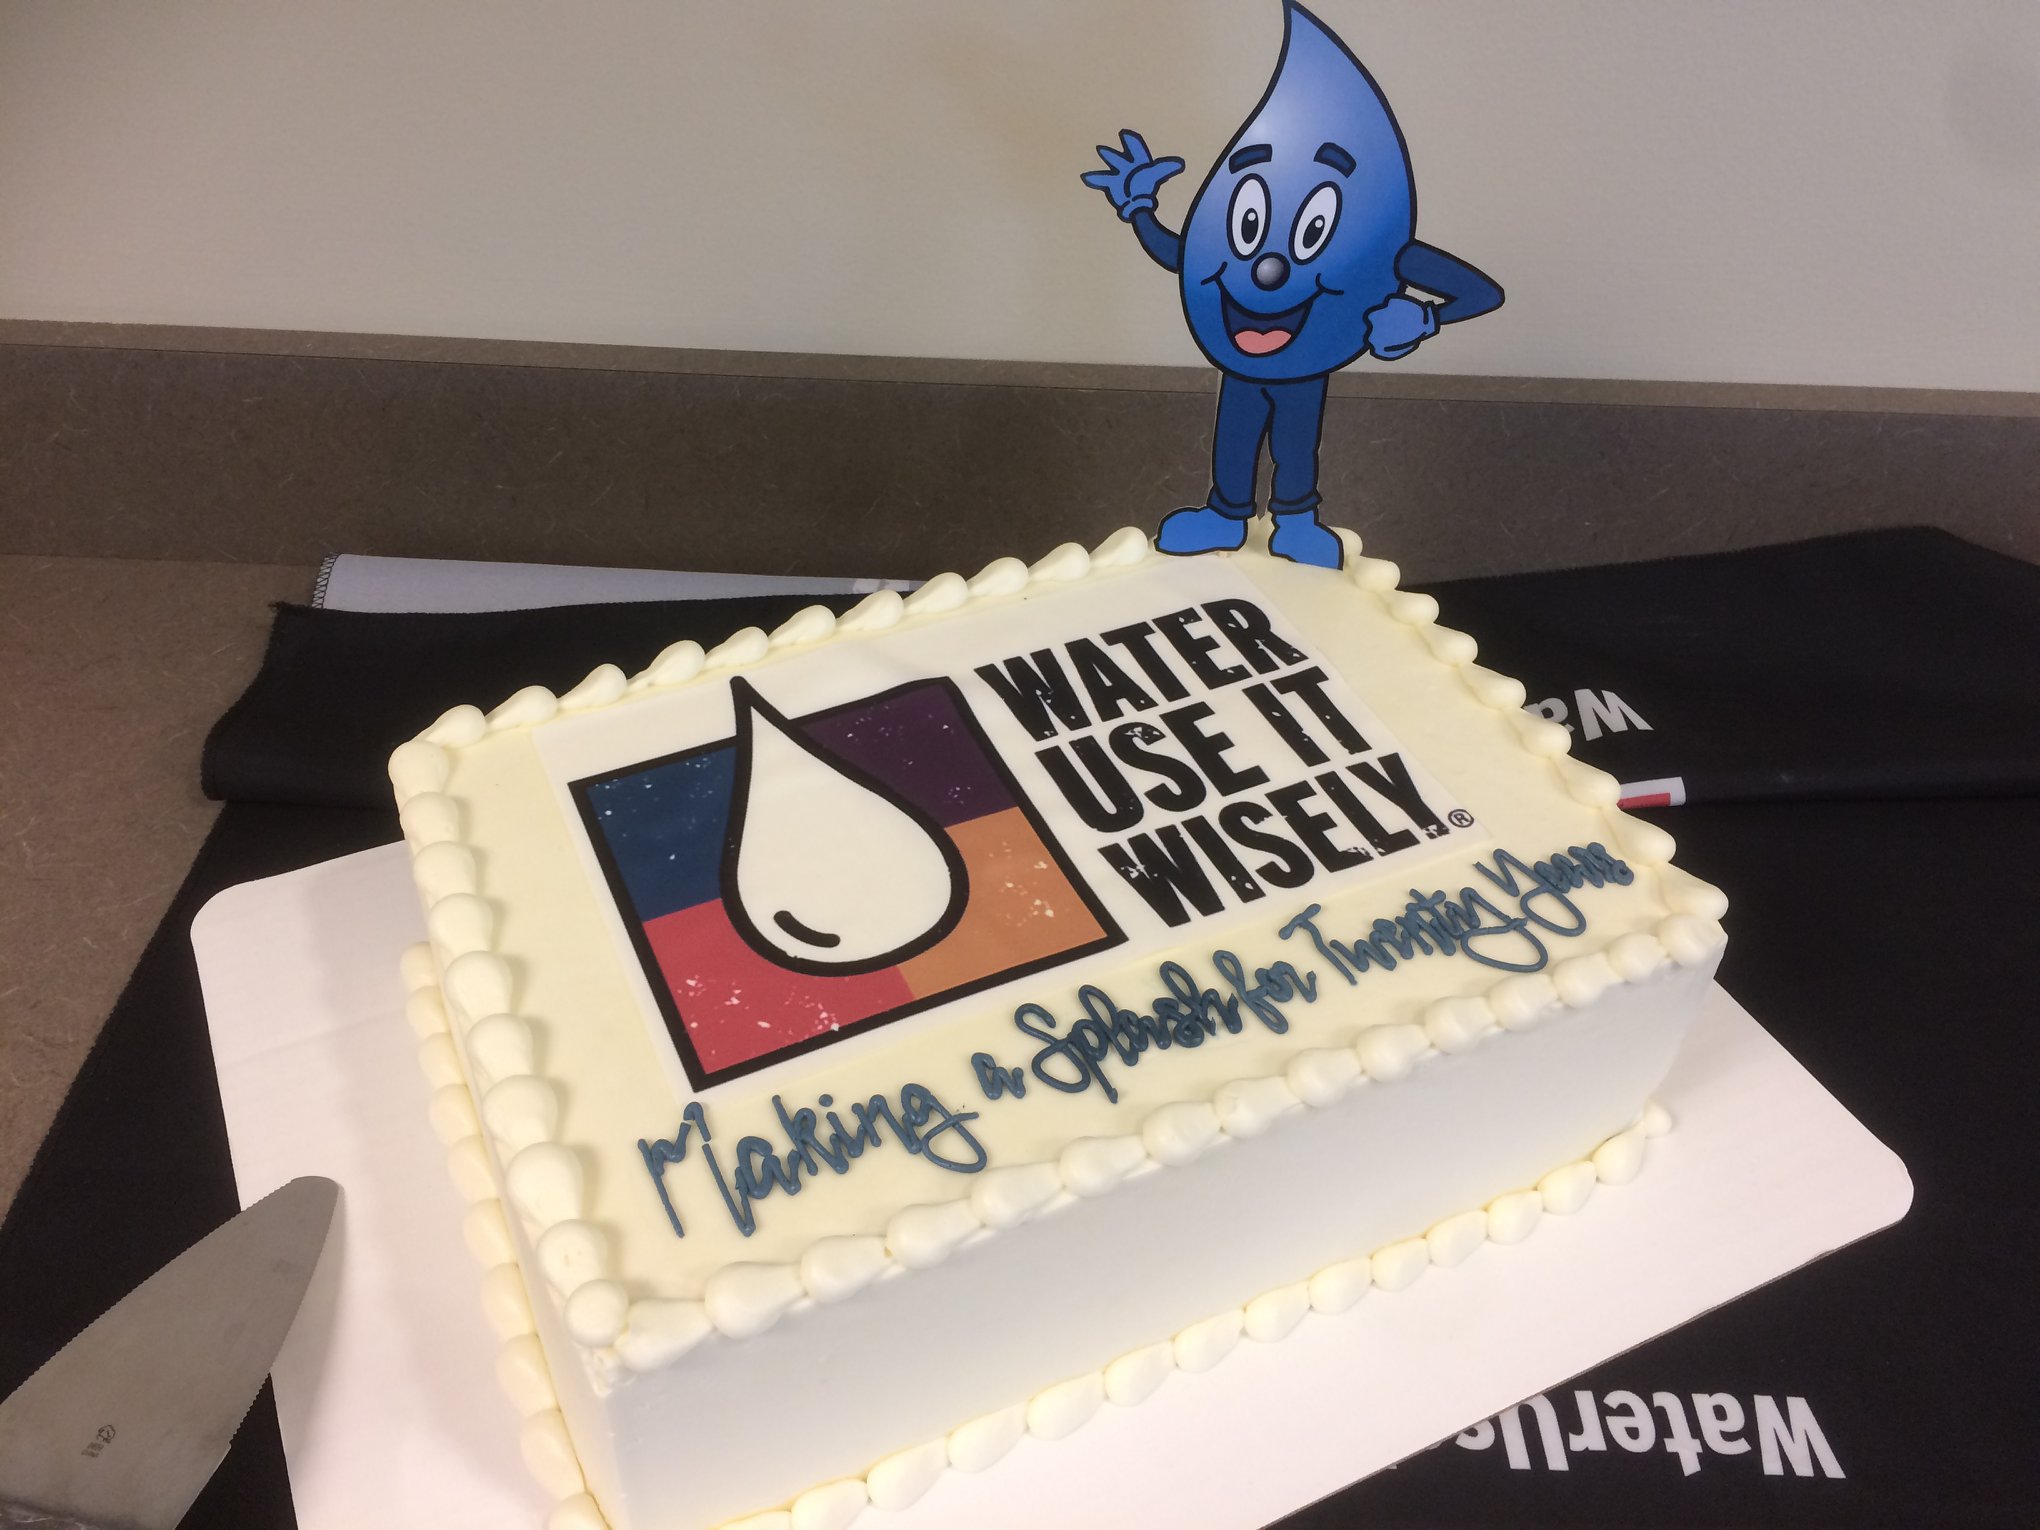 Water - Use It Wisely Cake with Wayne Drop Cut Out